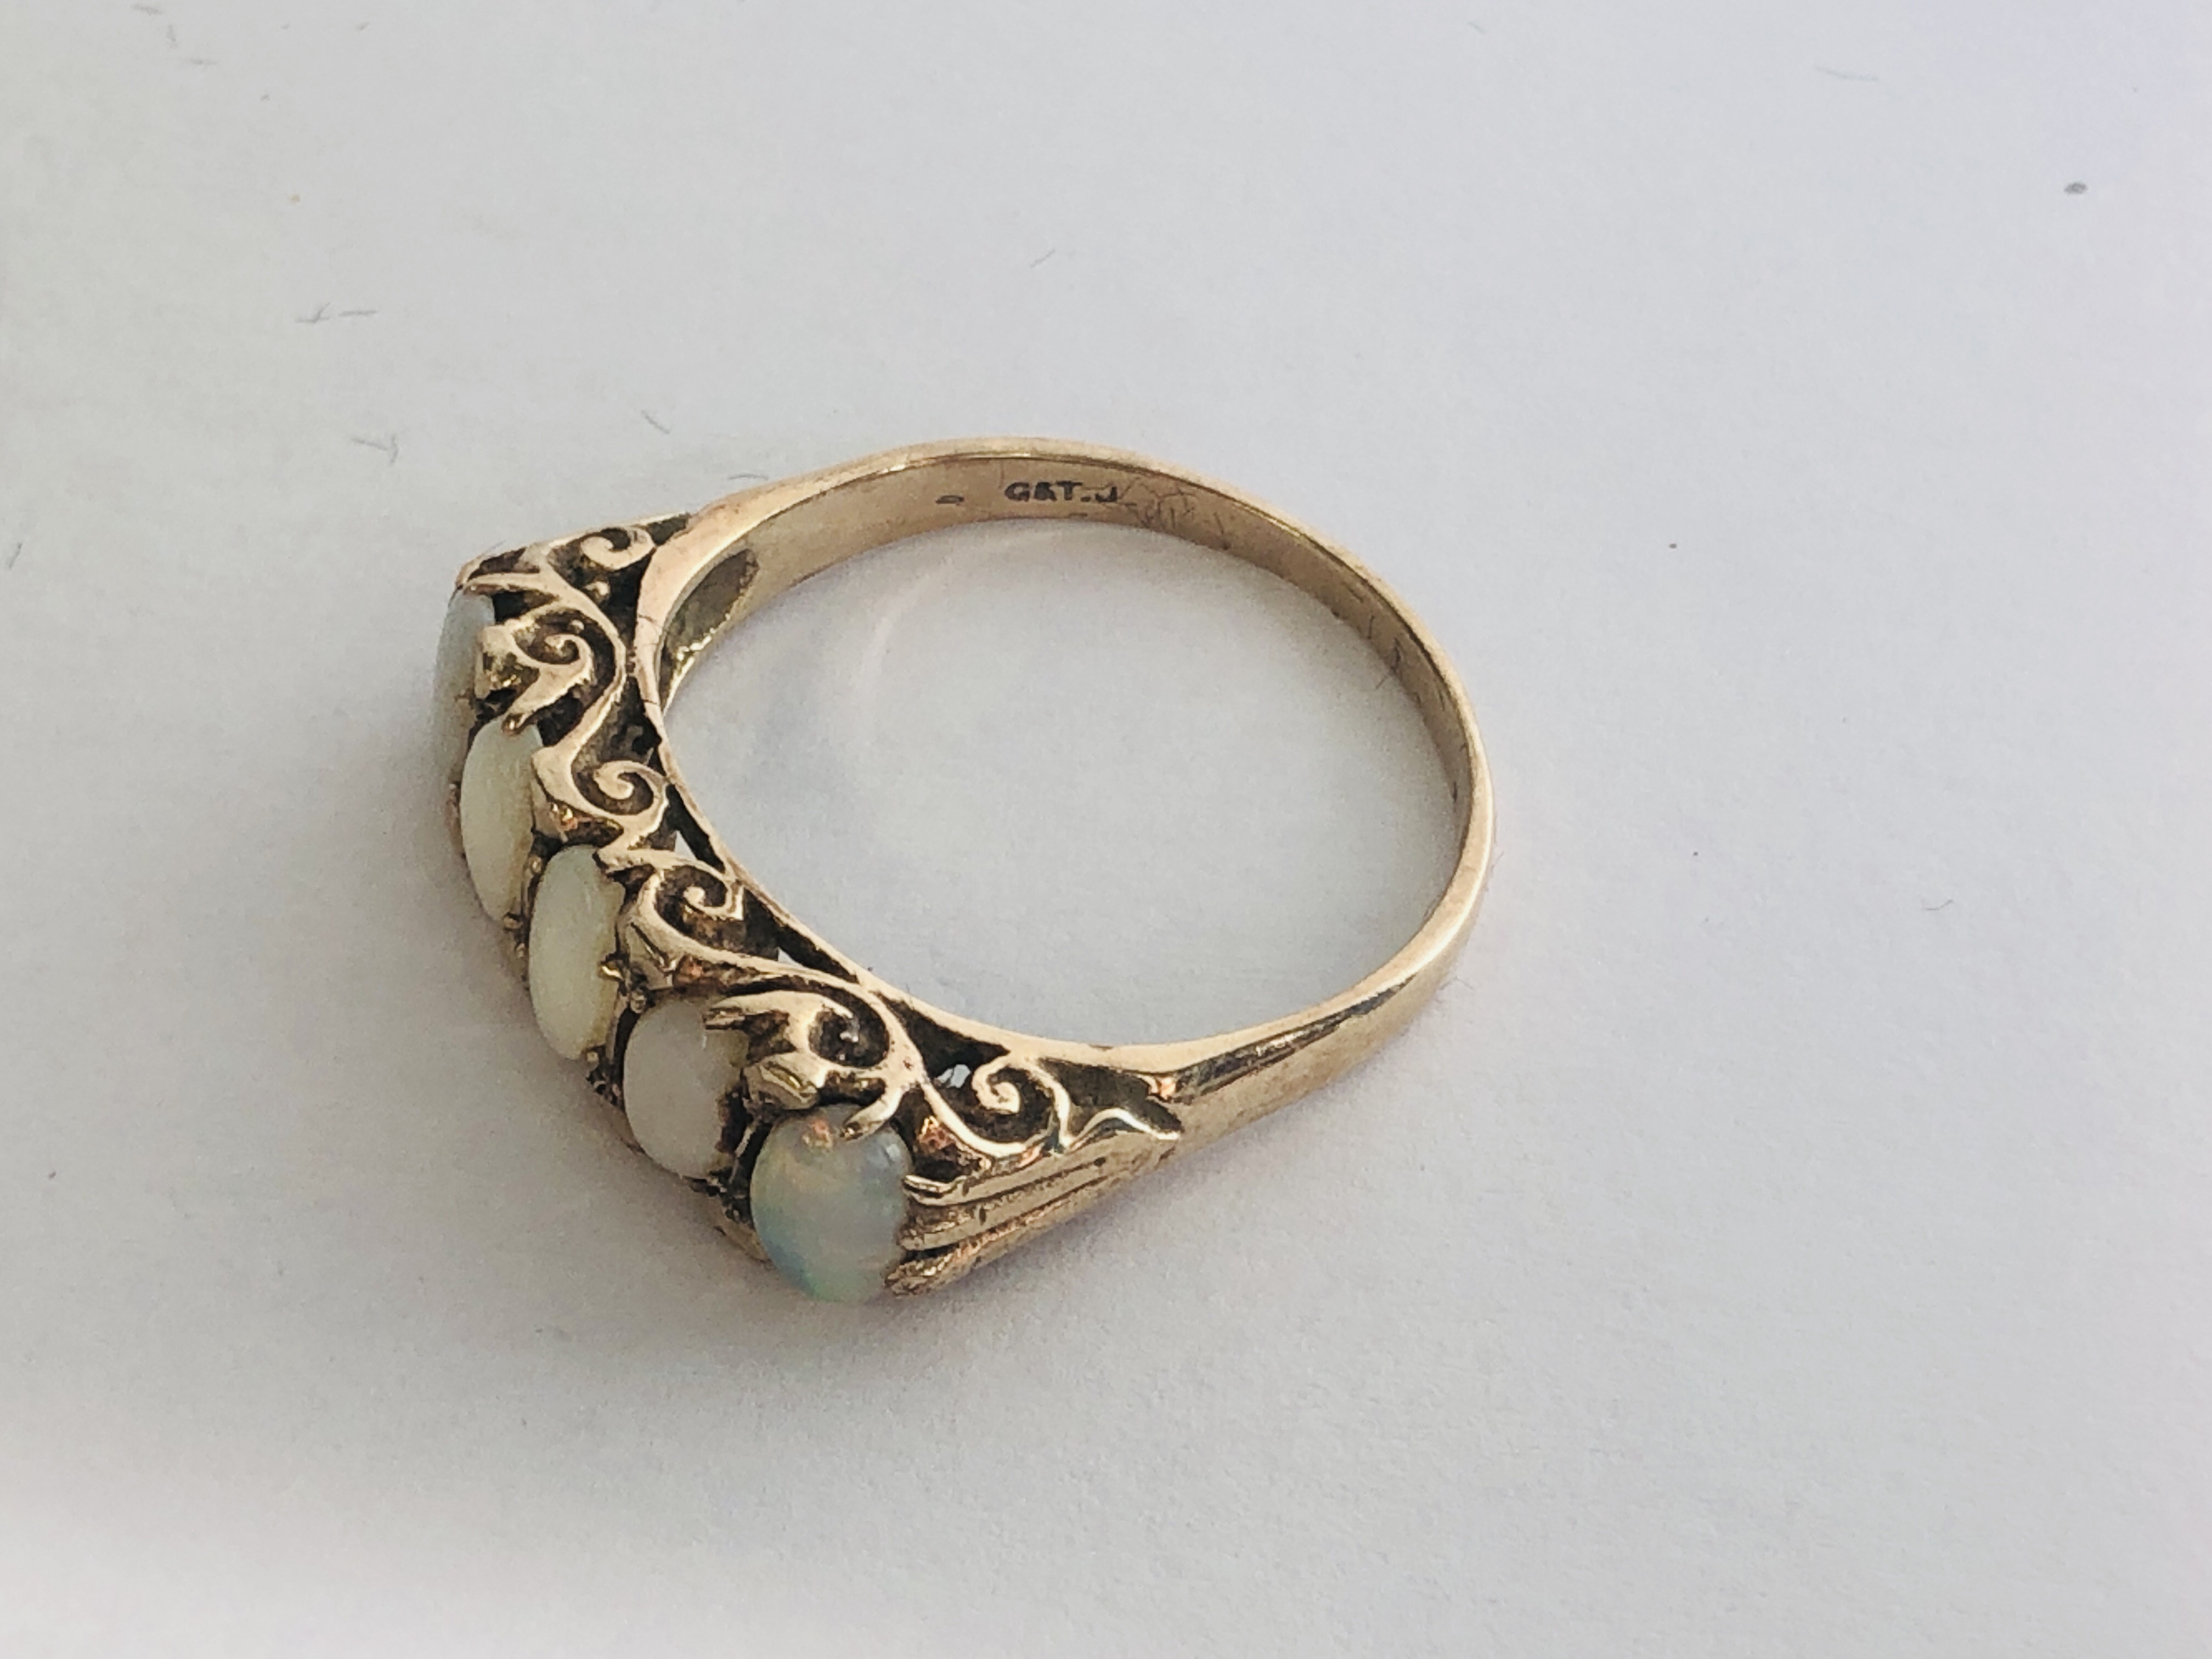 9CT GOLD 5 STONE OPAL RING. - Image 6 of 10